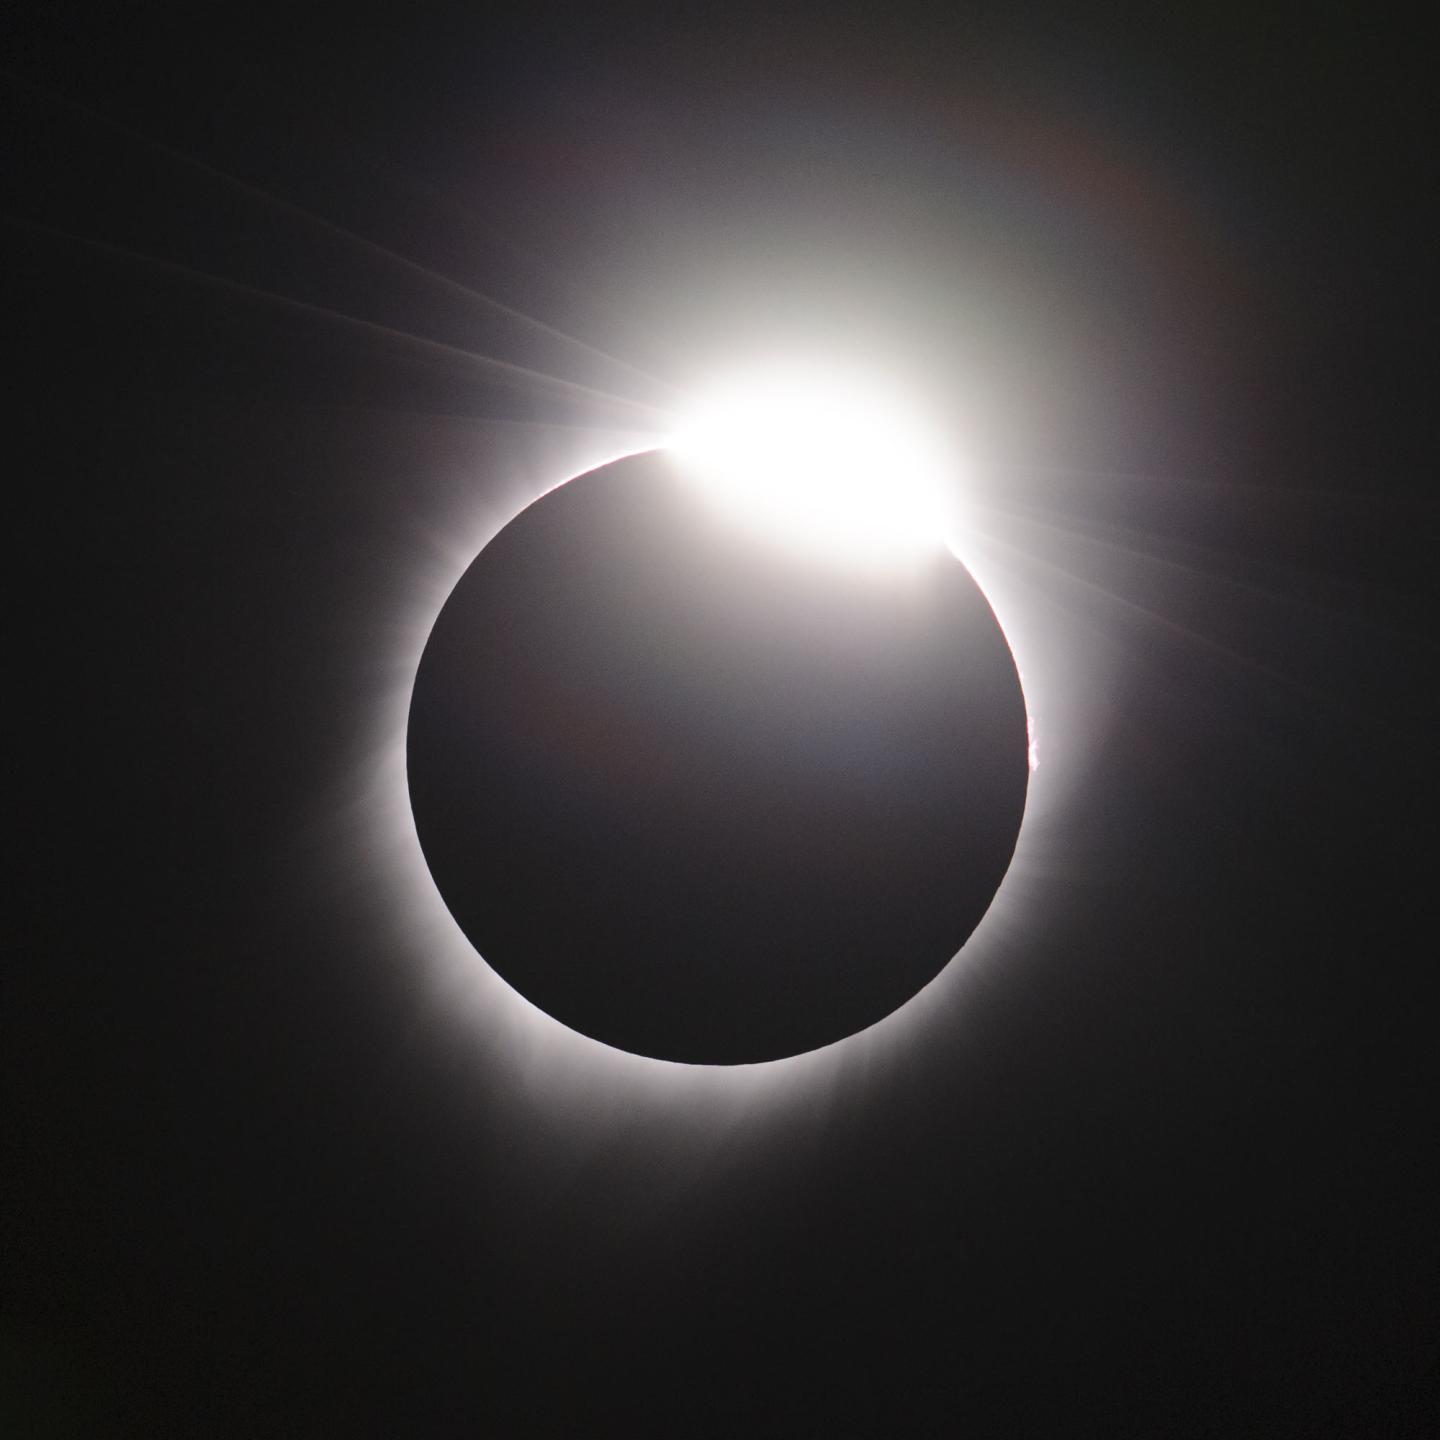 A picture taken during the 2017 solar eclipse in Oregon, showing a thin ring of light from the Sun around the Moon's shadow, with a bright 'diamond' of light in the top right